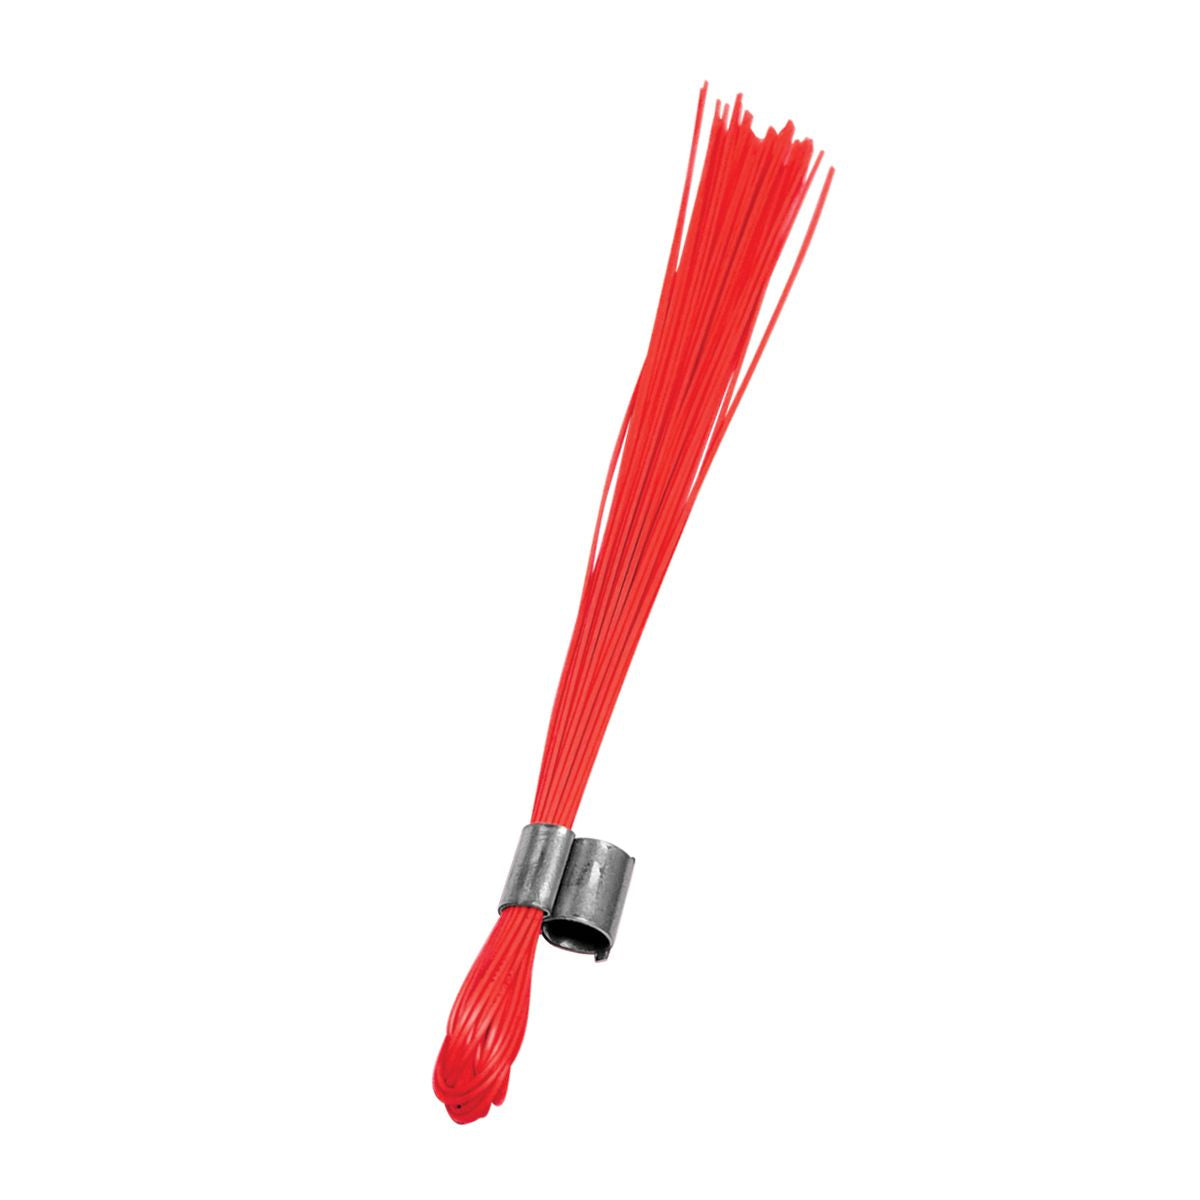 SitePro 19-SW6-R Stake Whiskers, Red 25 per bundle